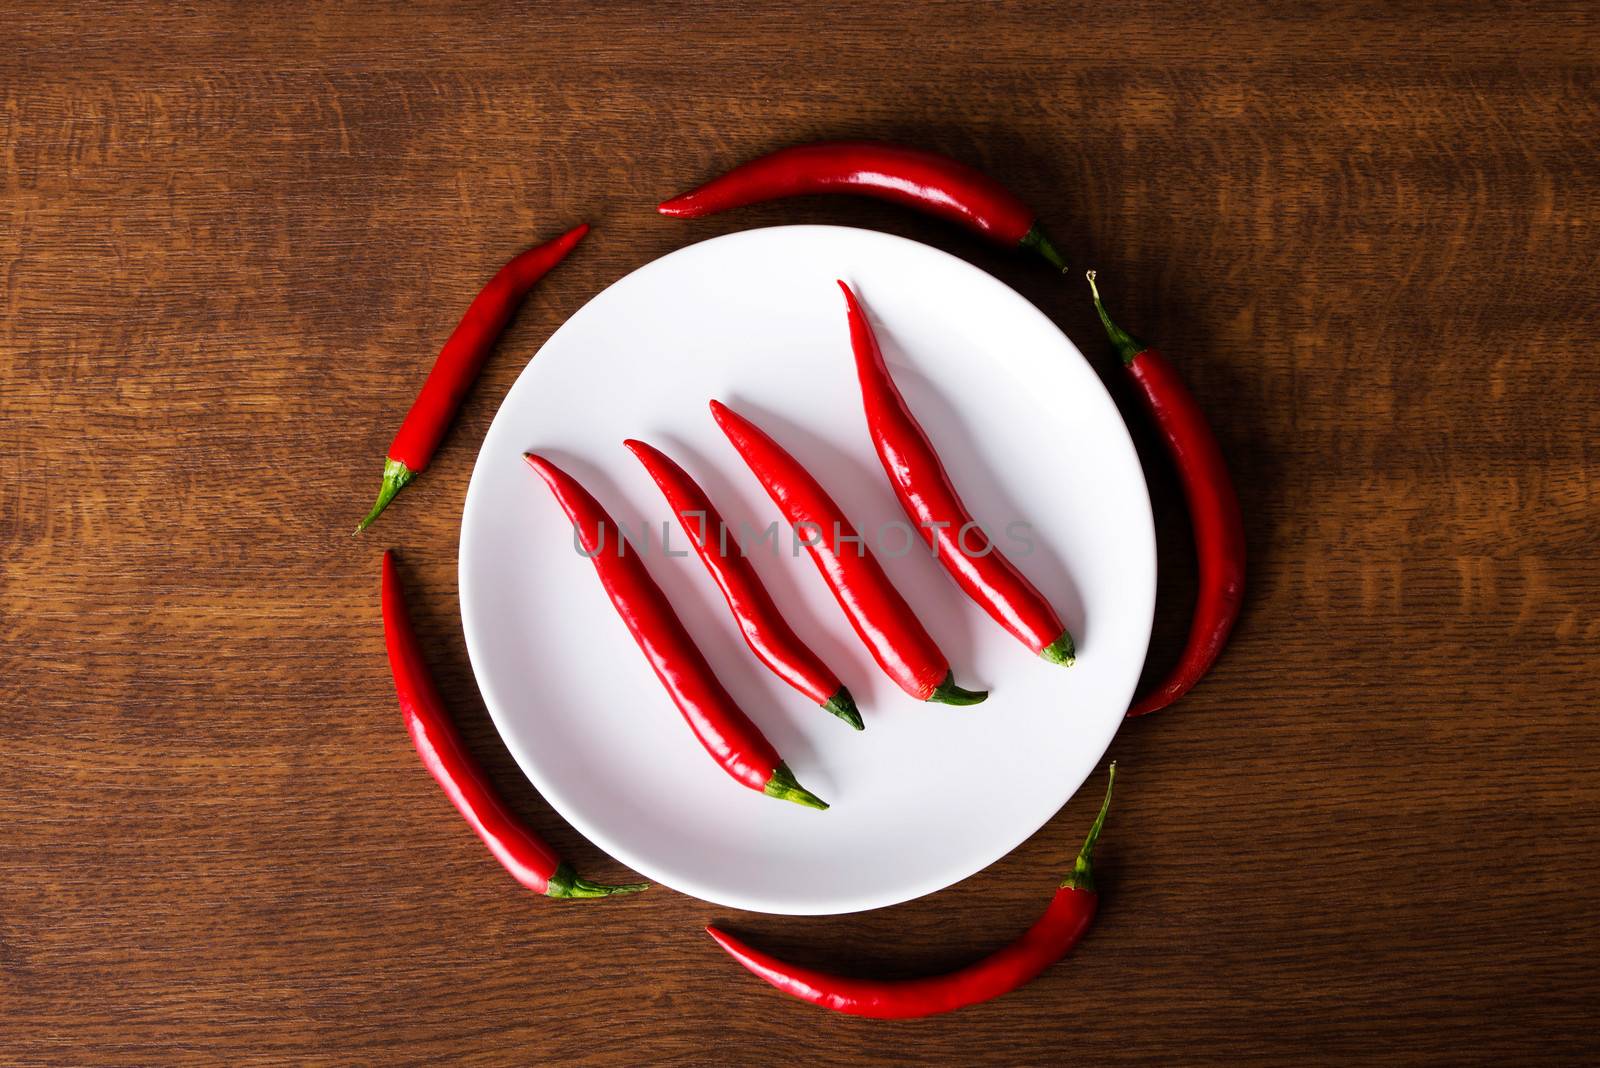 Composition of red chili peppers around white plate.